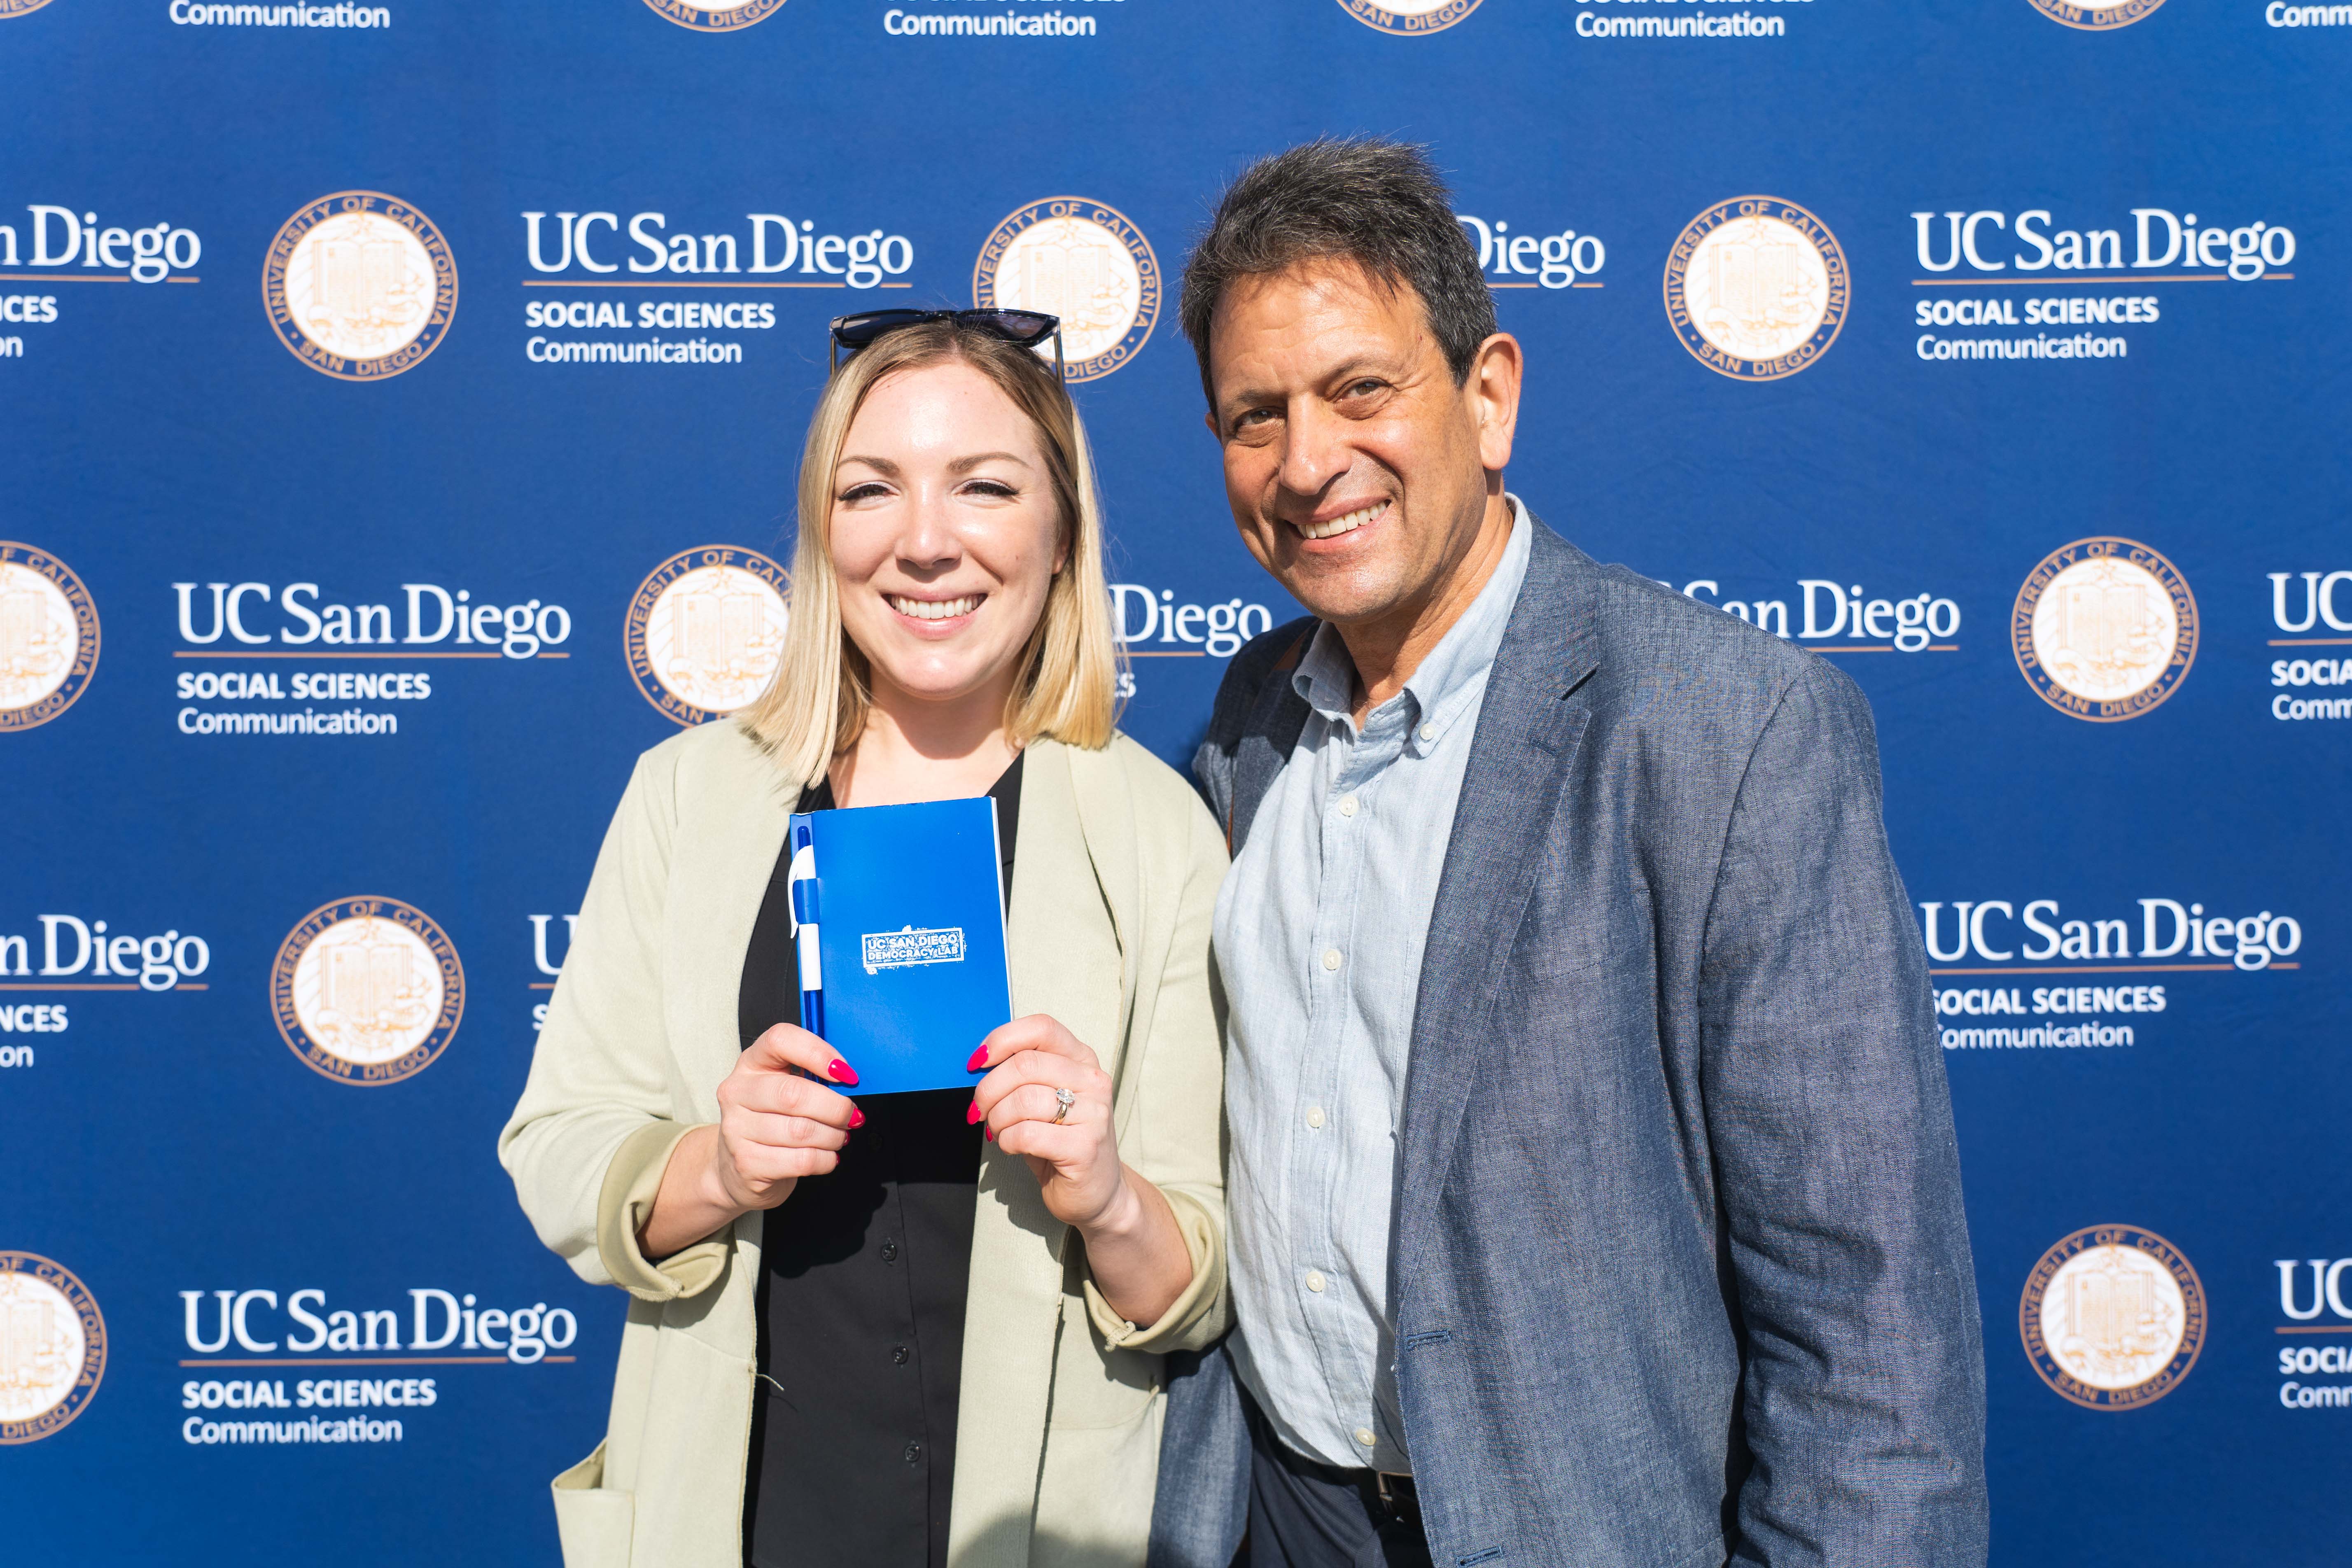 Department Chair Brian Goldfarb and MSO Taylor Benrieh hold Democracy Lab swag in front of a step and repeat banner with UCSD Department of Communication logos